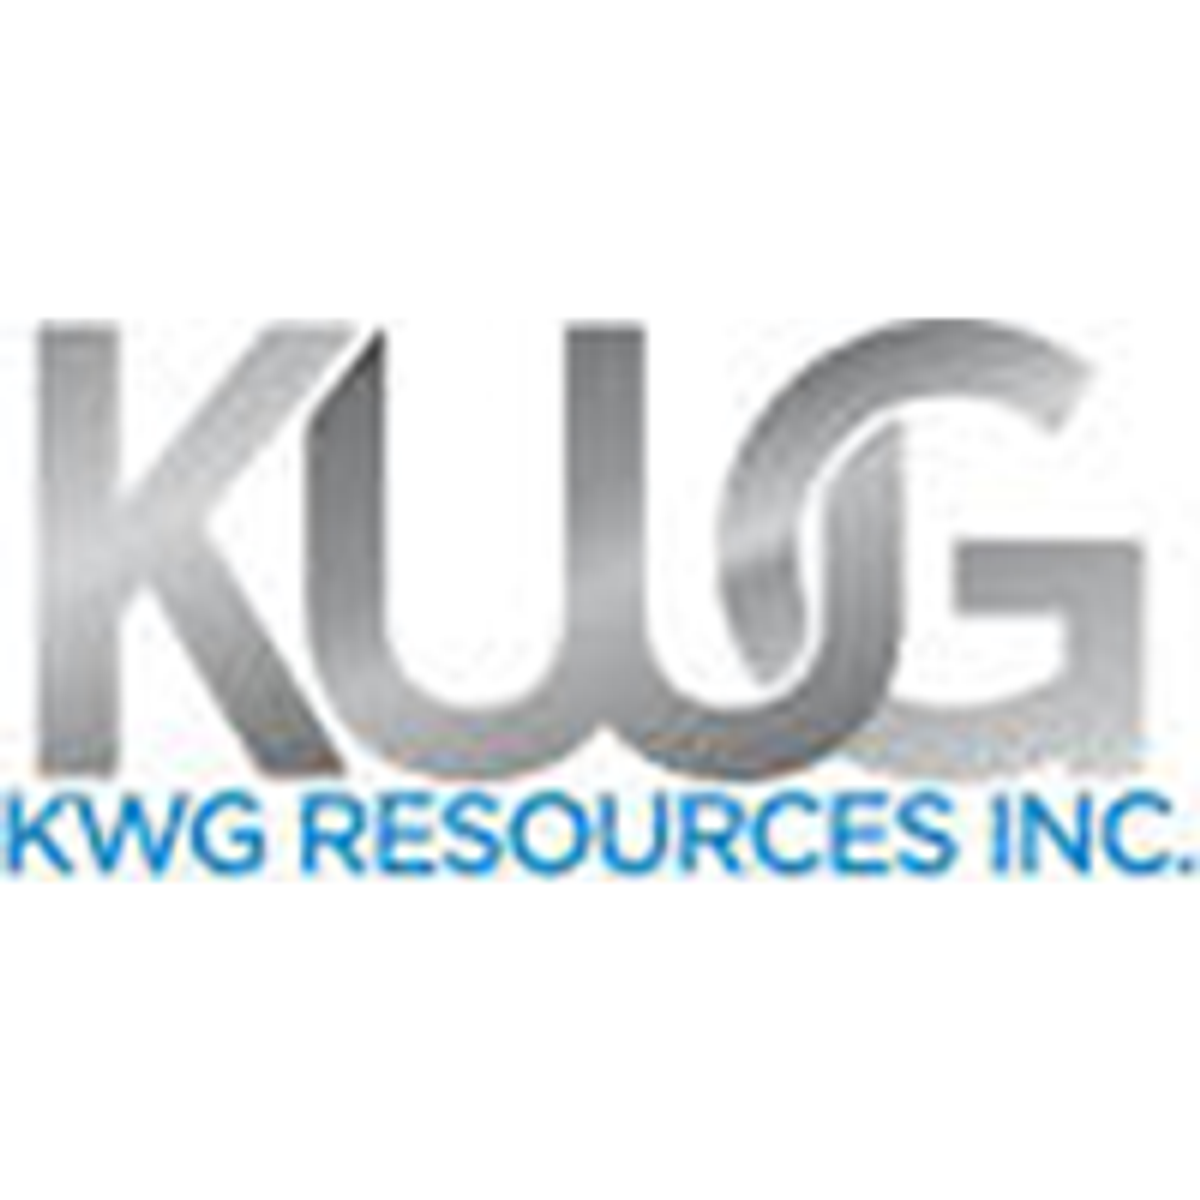 Fancamp and KWG Resources Announce Closing of the Sale of Fancamp's Interests in Koper Lake-McFaulds Mining Claims to KWG